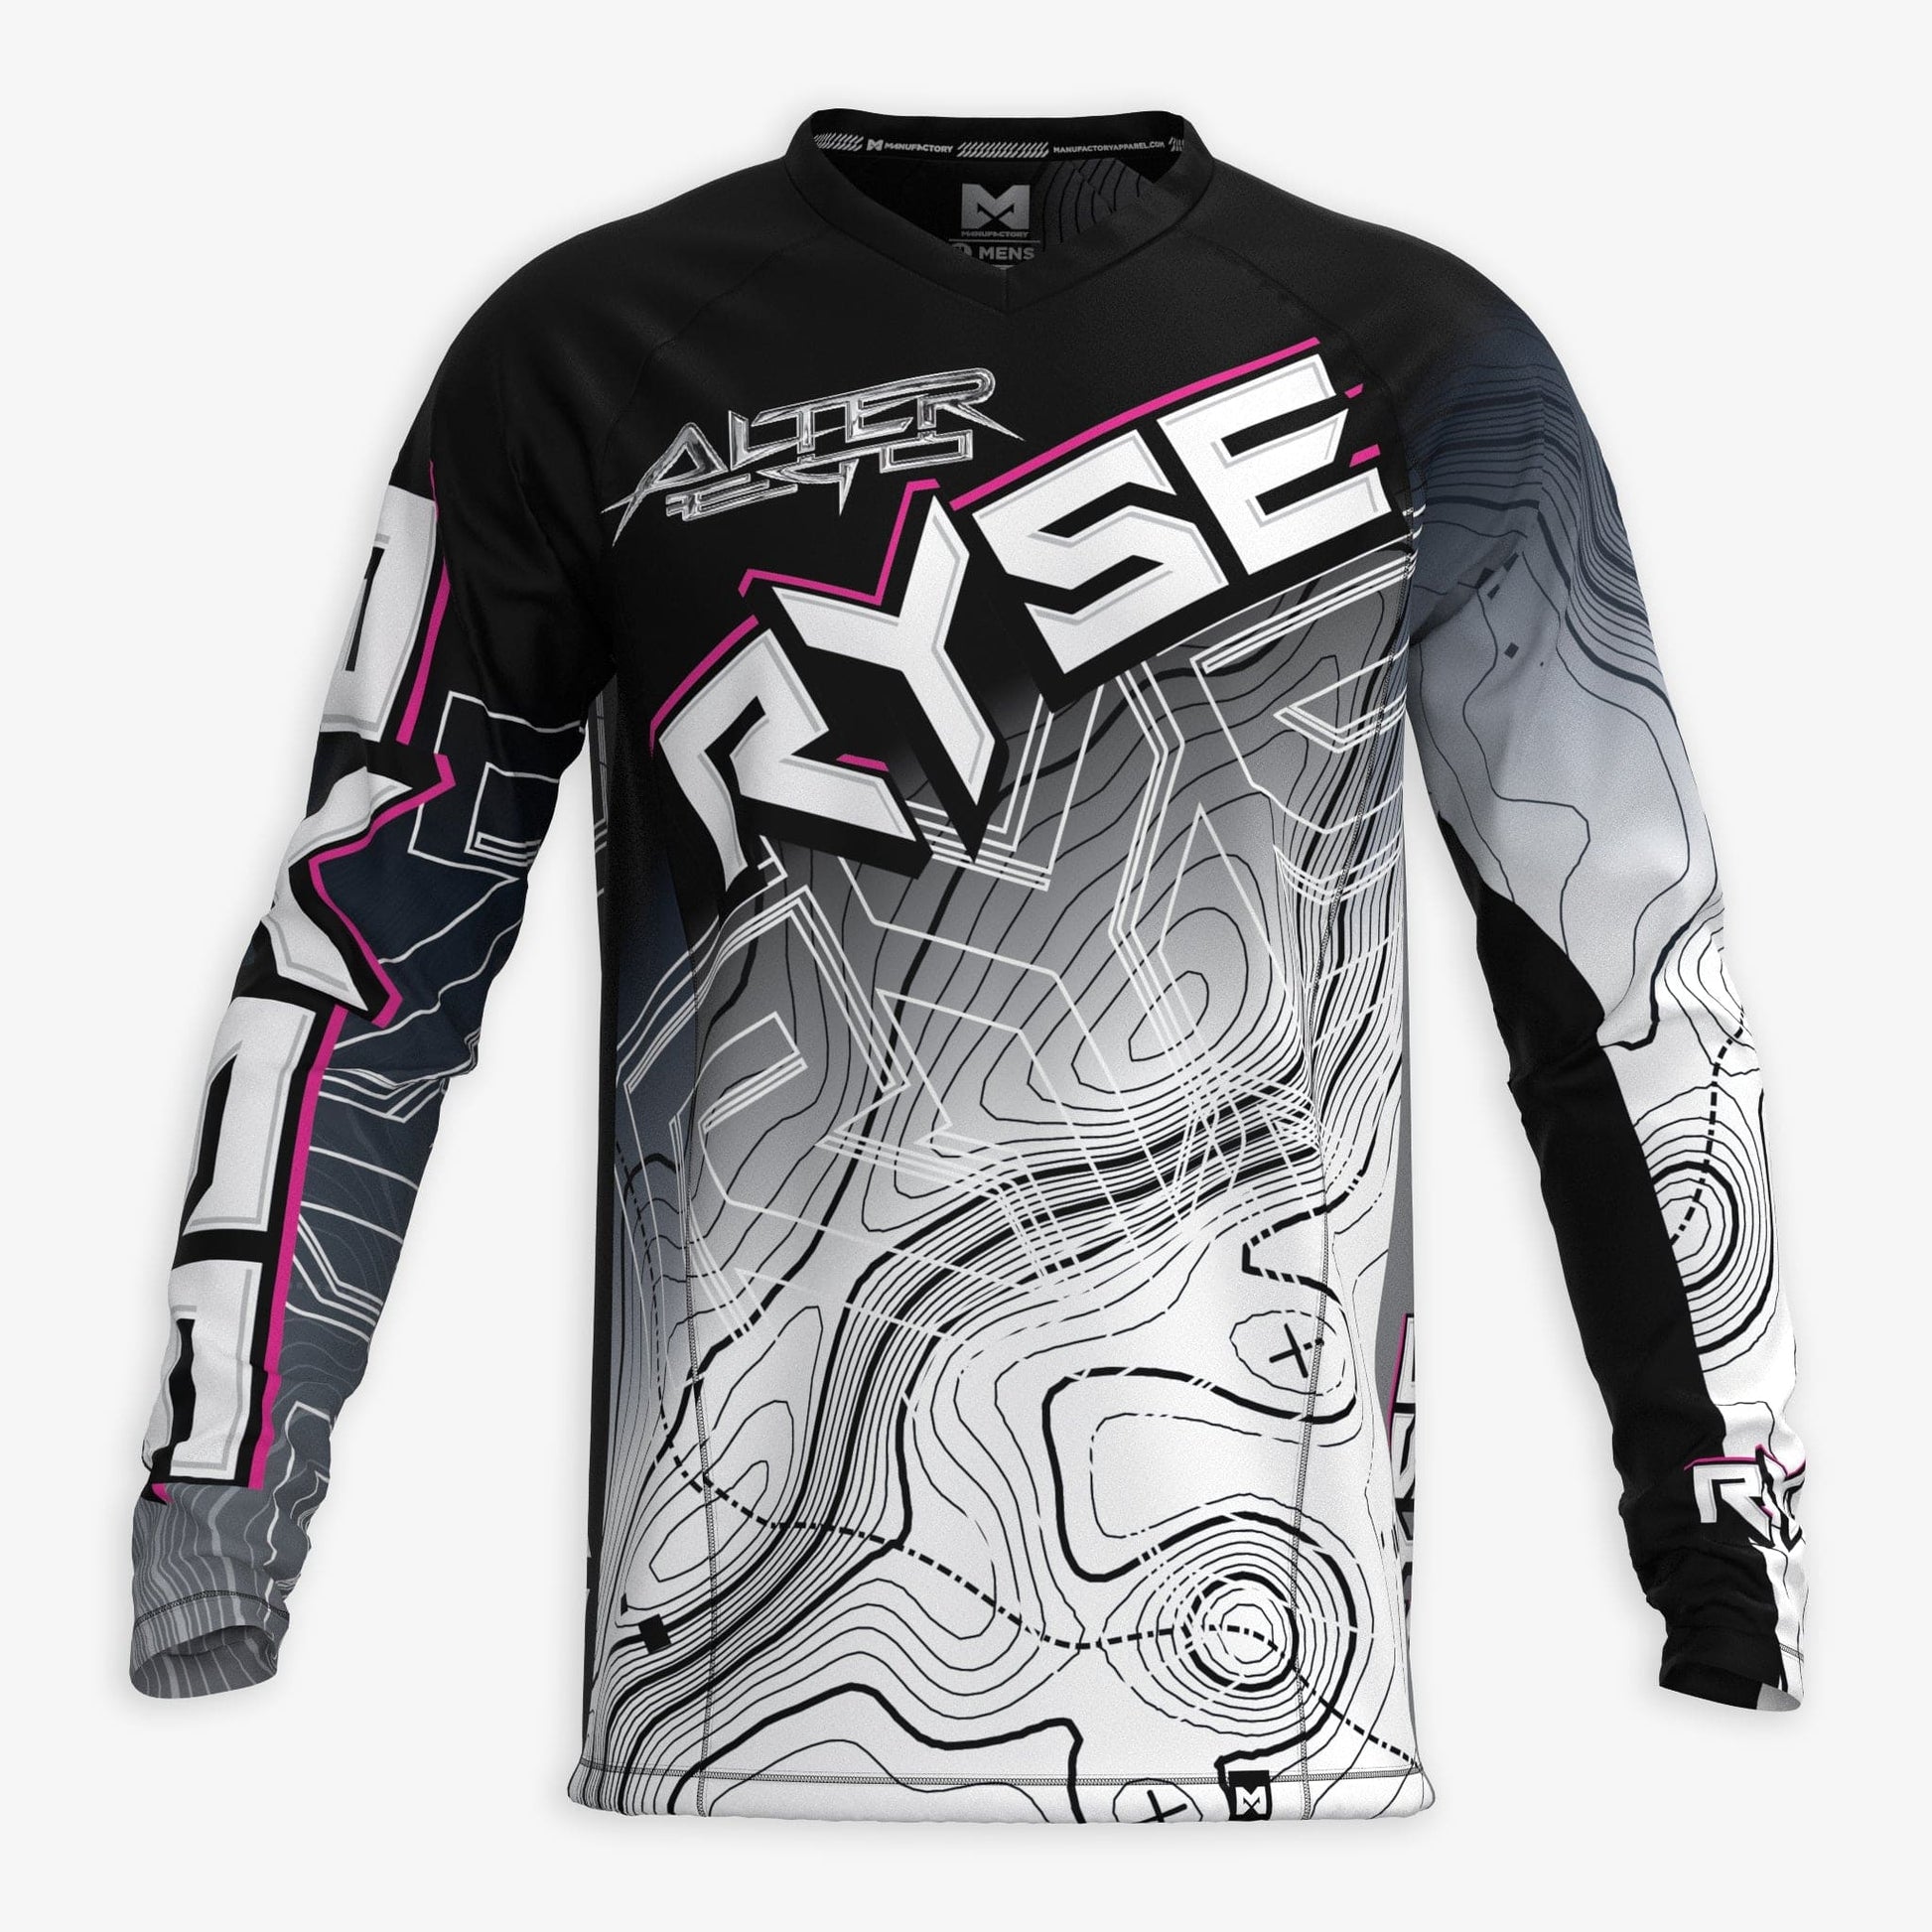 RYSE Jersey - Manufactory Apparel - The Alter Ego Project